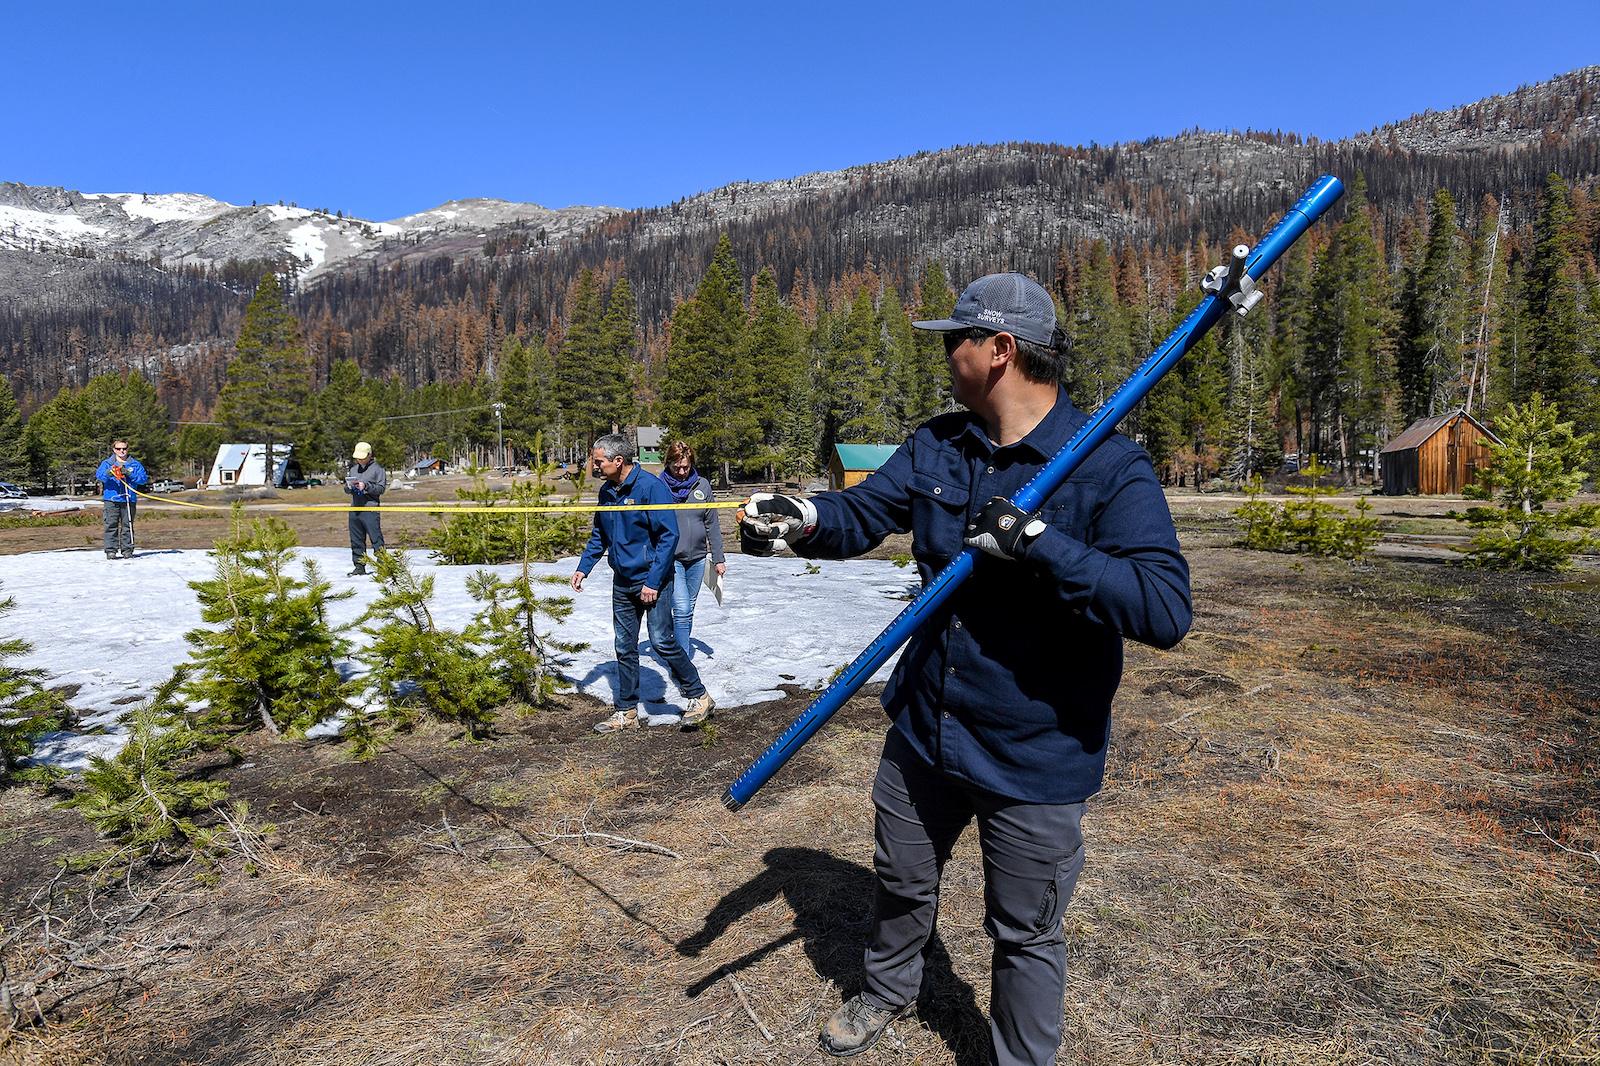 California's Natural Resources Secretary Wade Crowfoot joined the Department of Water Resources Director Karla Nemeth, and Sean de Guzman, Manager of the California Department of Water Resources Snow Surveys and Water Supply Forecasting Unit, during the season's fourth media snow survey of 2022.